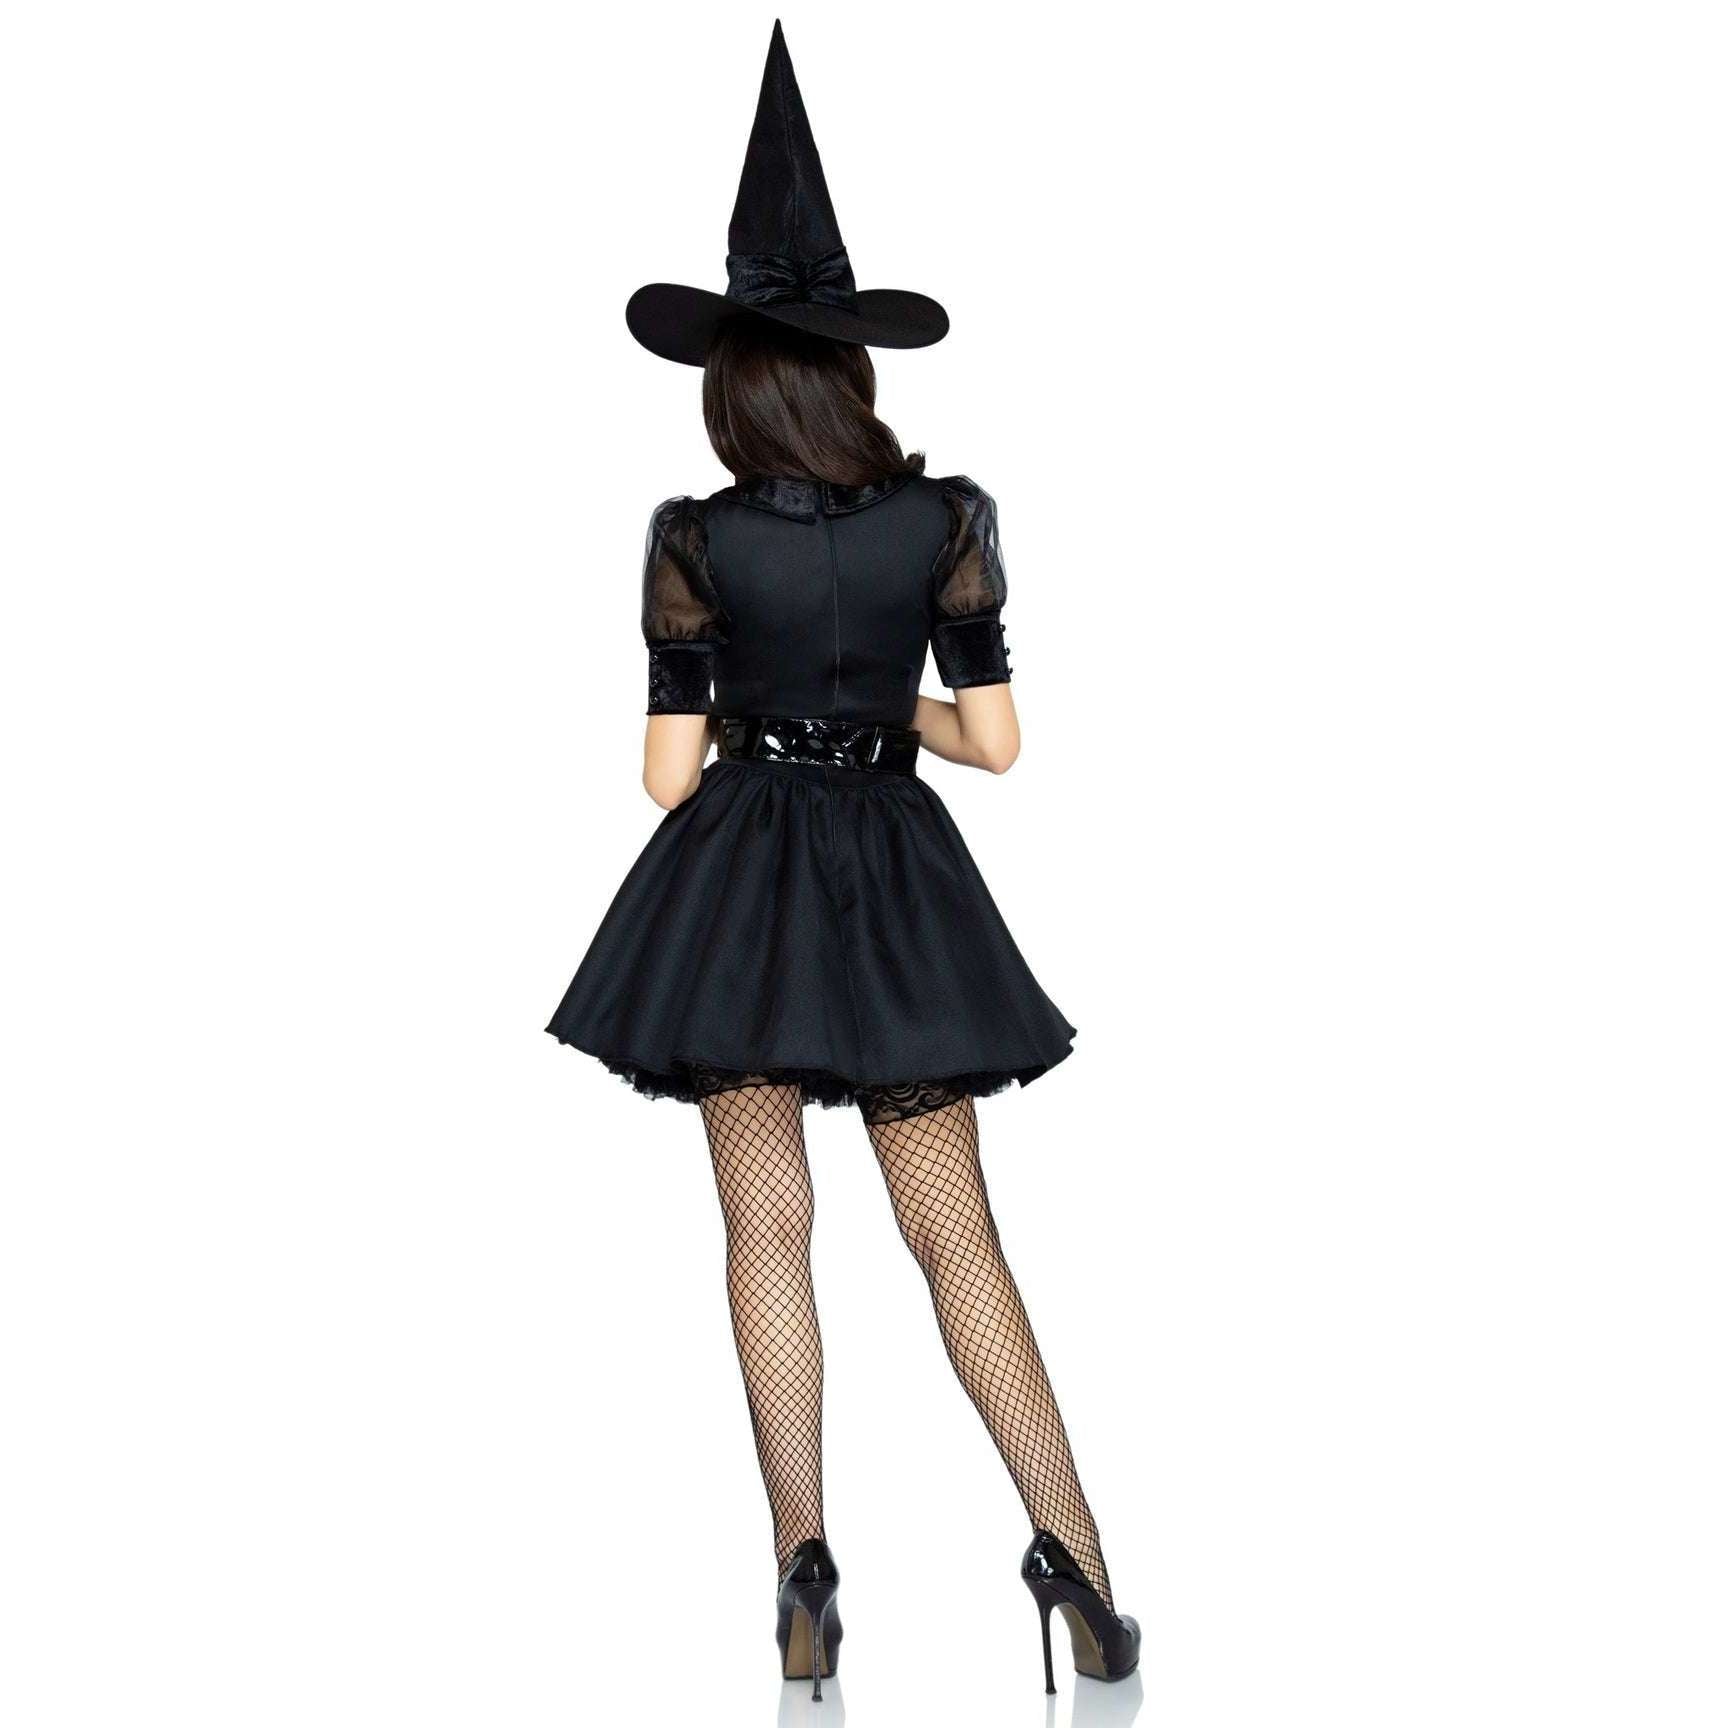 Bewitching Witch Dress Adult Costume